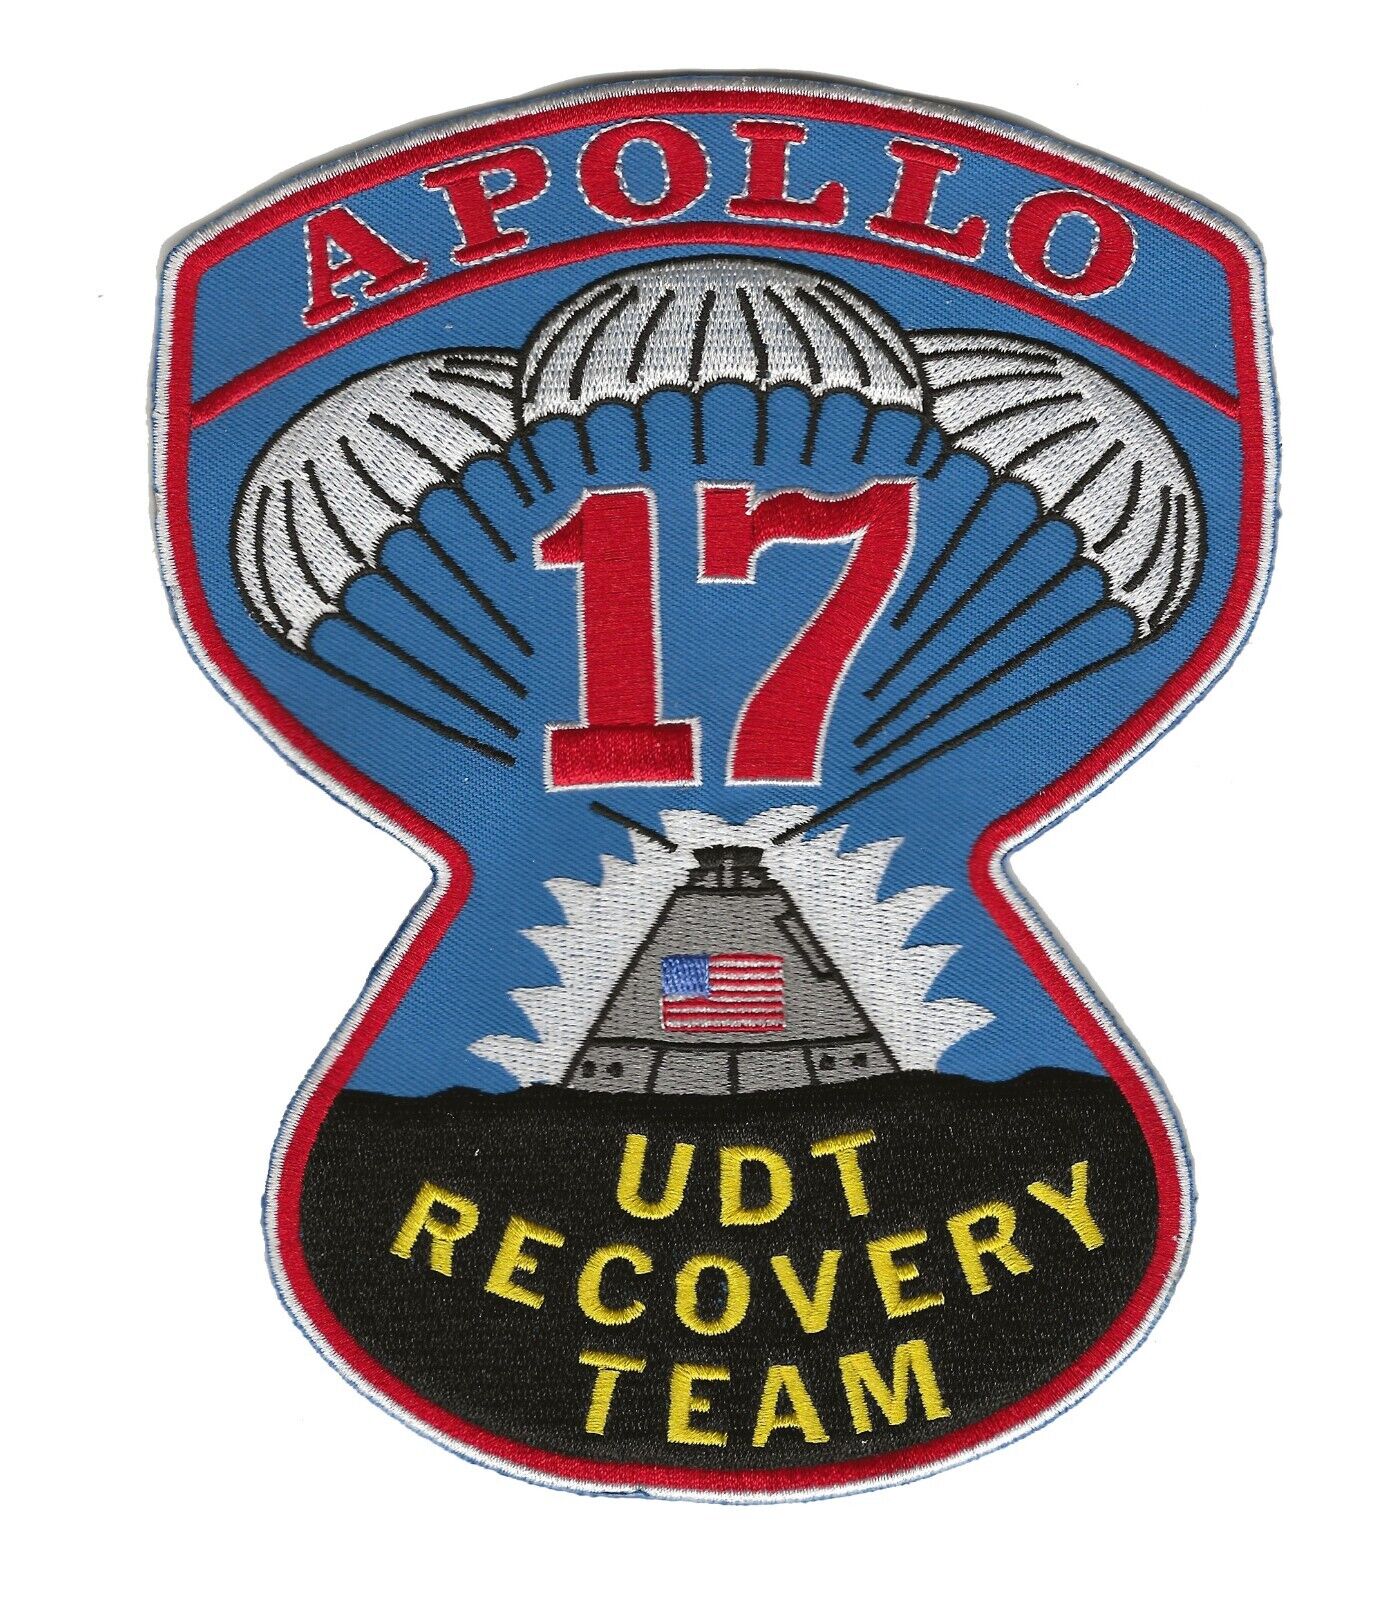 Apollo 17 US Navy UDT recovery team NASA space patch